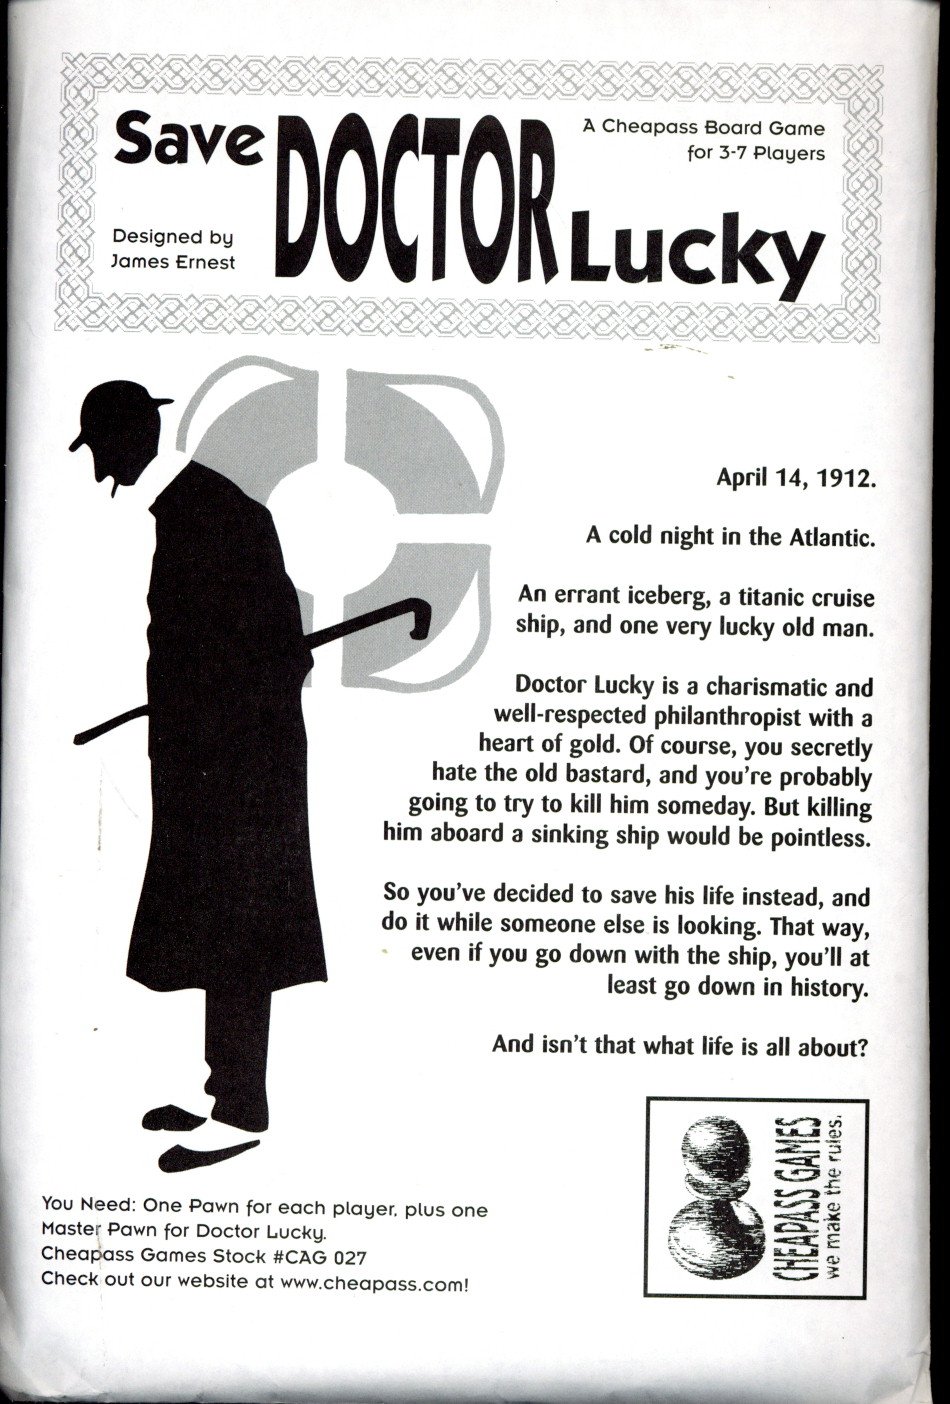 Cheapass Games: Save Doctor Lucky